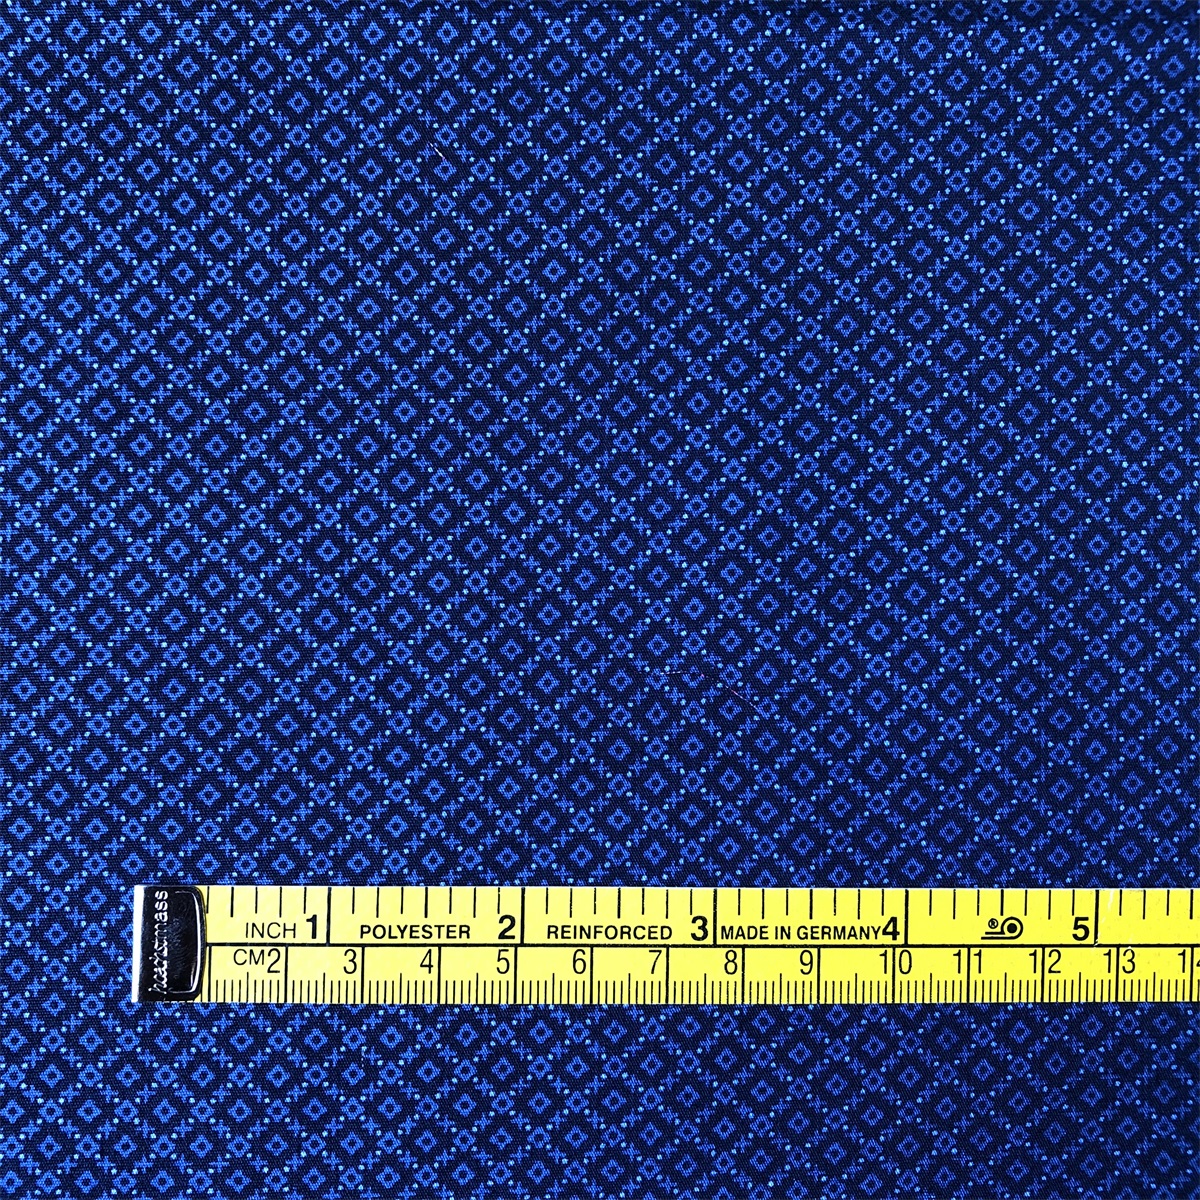 Sun-rising Textile Cotton Printed fabric customized pattern 100% cotton poplin printed shirts woven fabric for men's casual shirt